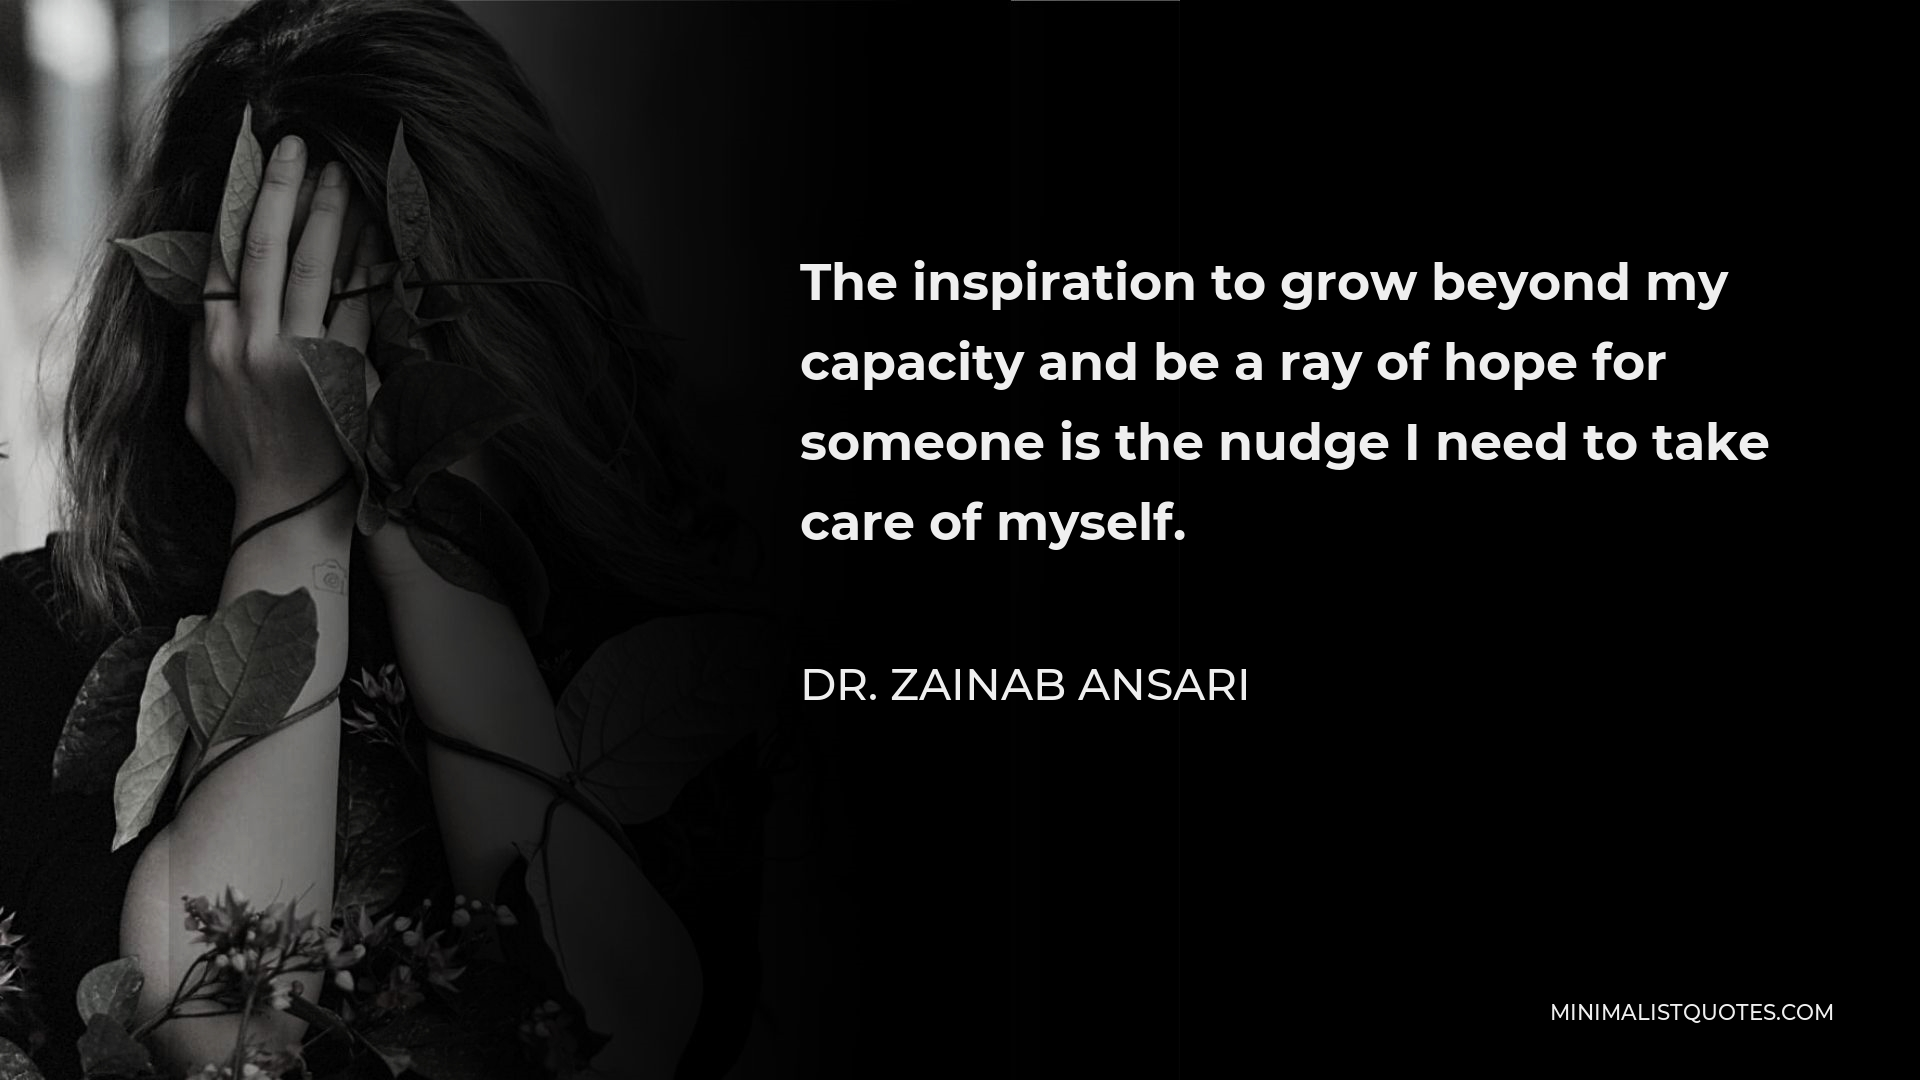 Dr. Zainab Ansari Quote - The inspiration to grow beyond my capacity and be a ray of hope for someone is the nudge I need to take care of myself.